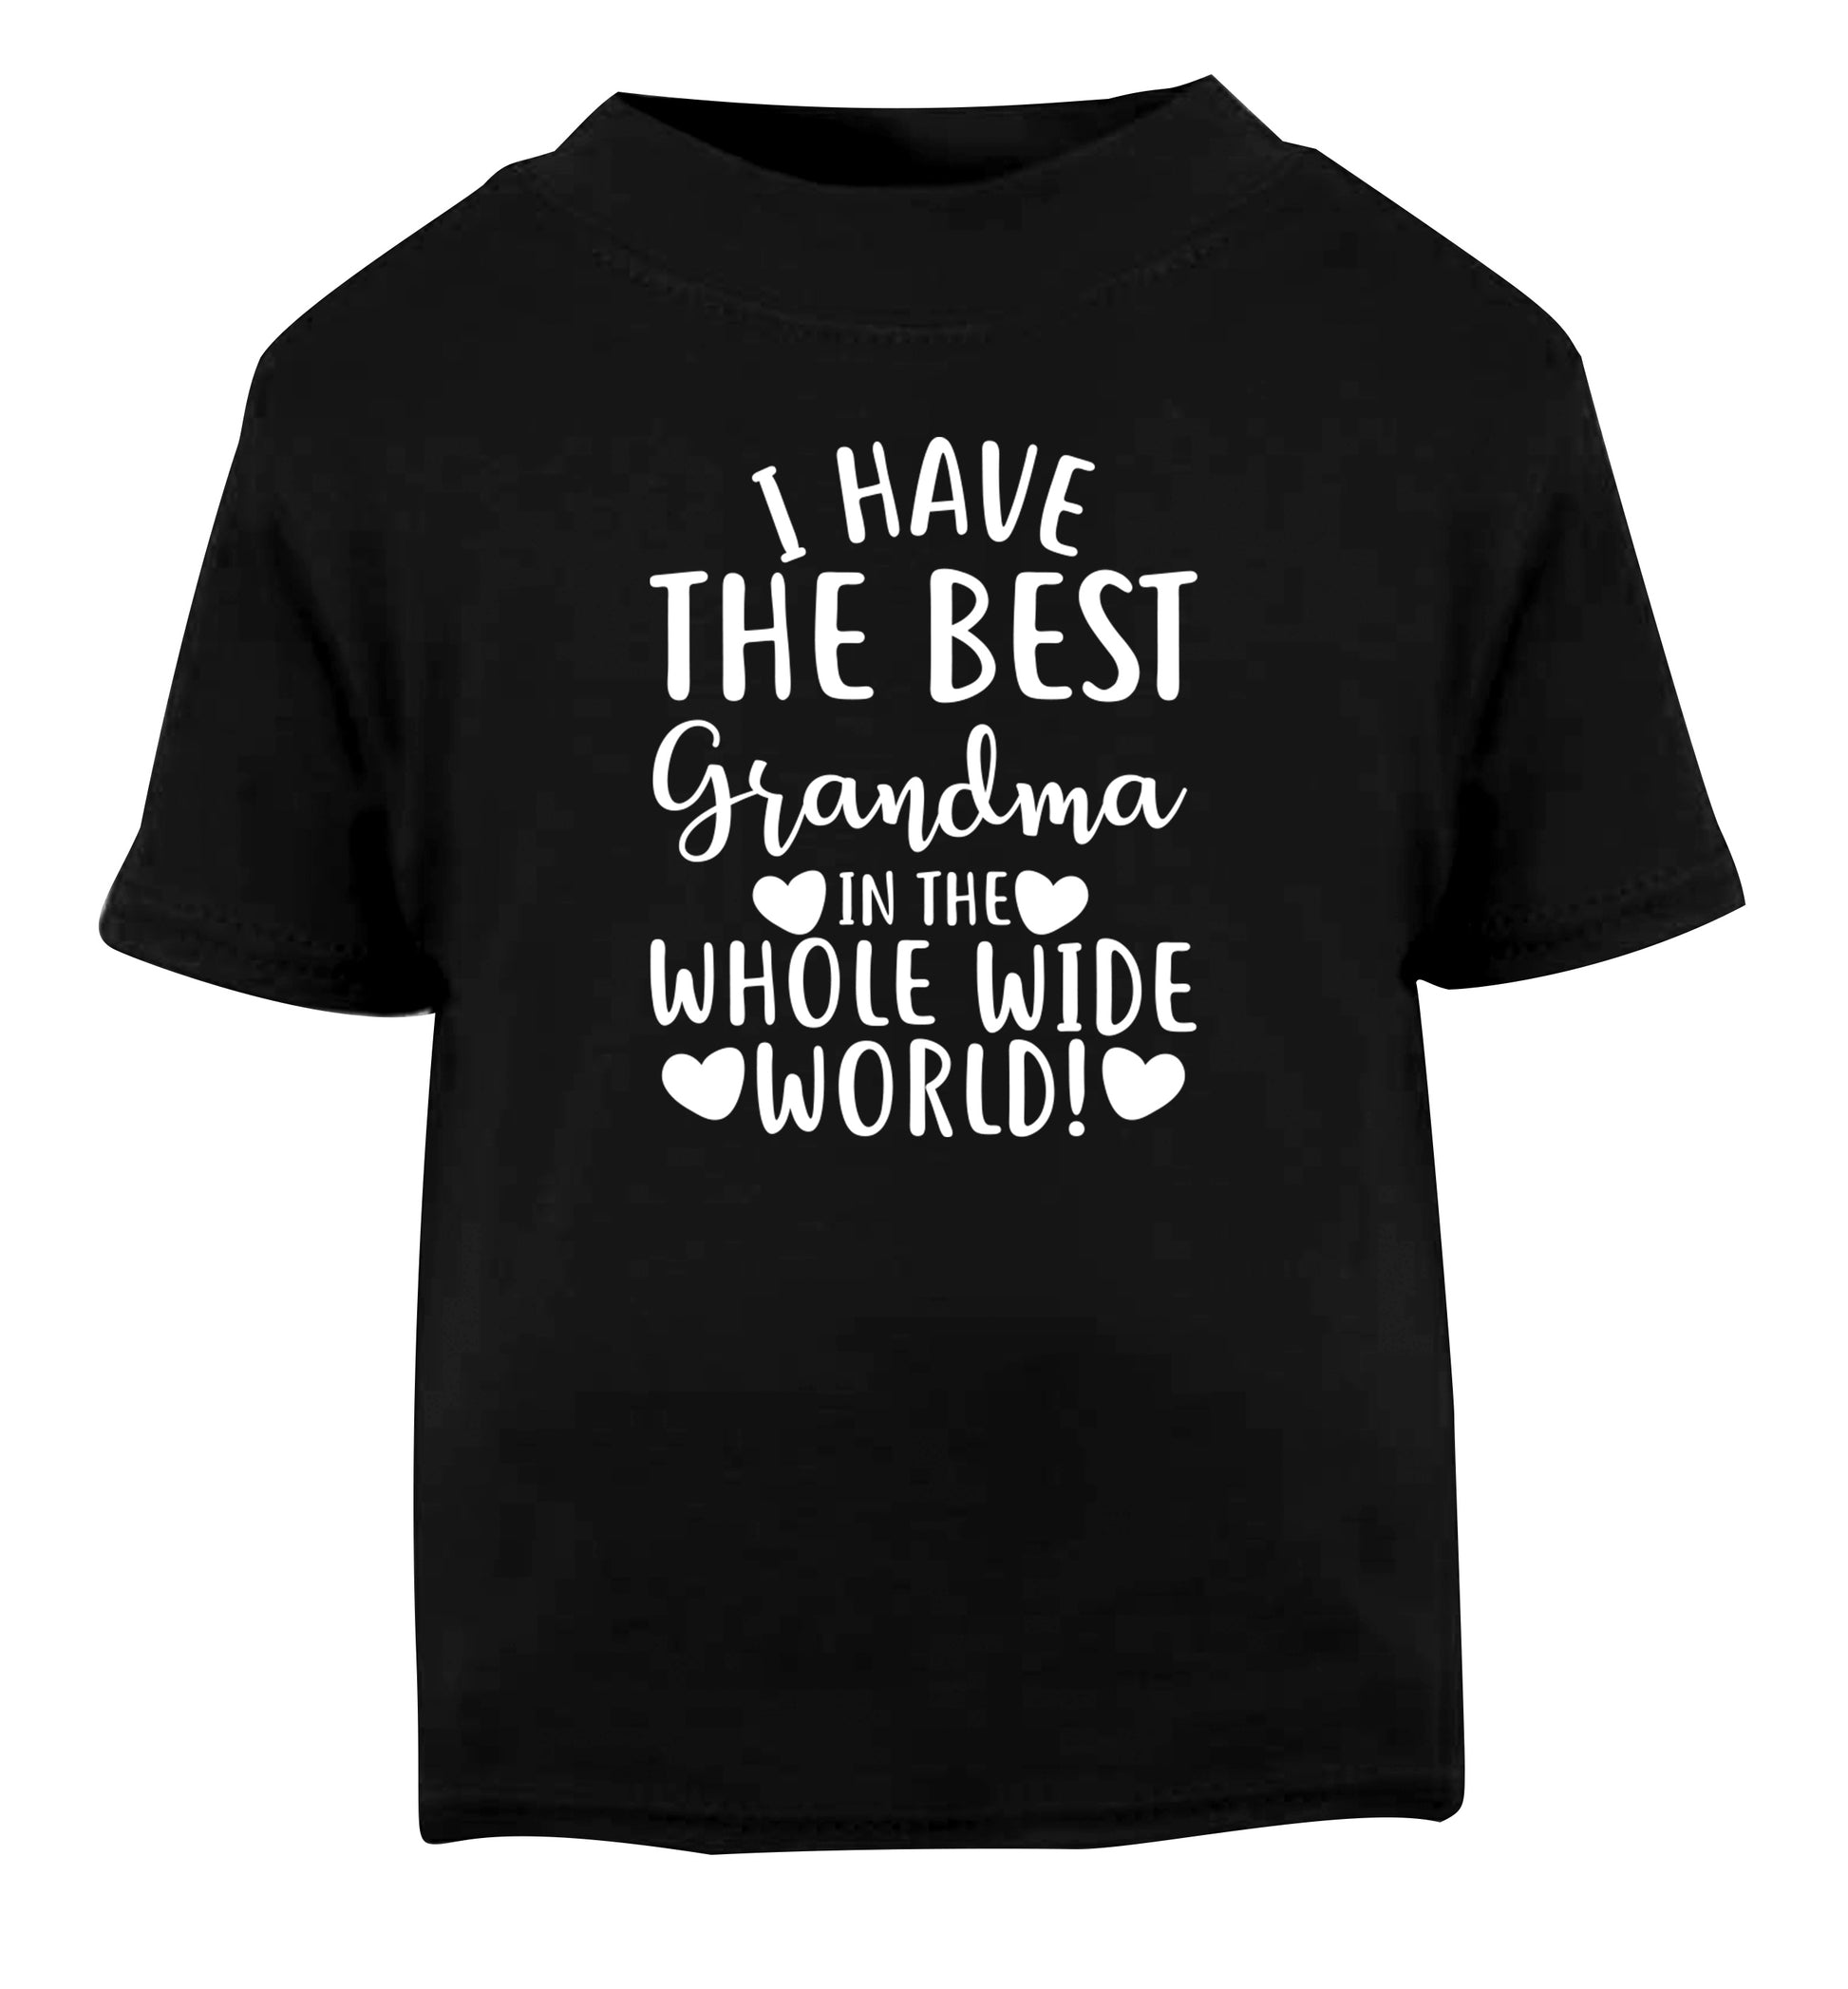 I have the best grandma in the whole wide world! Black Baby Toddler Tshirt 2 years